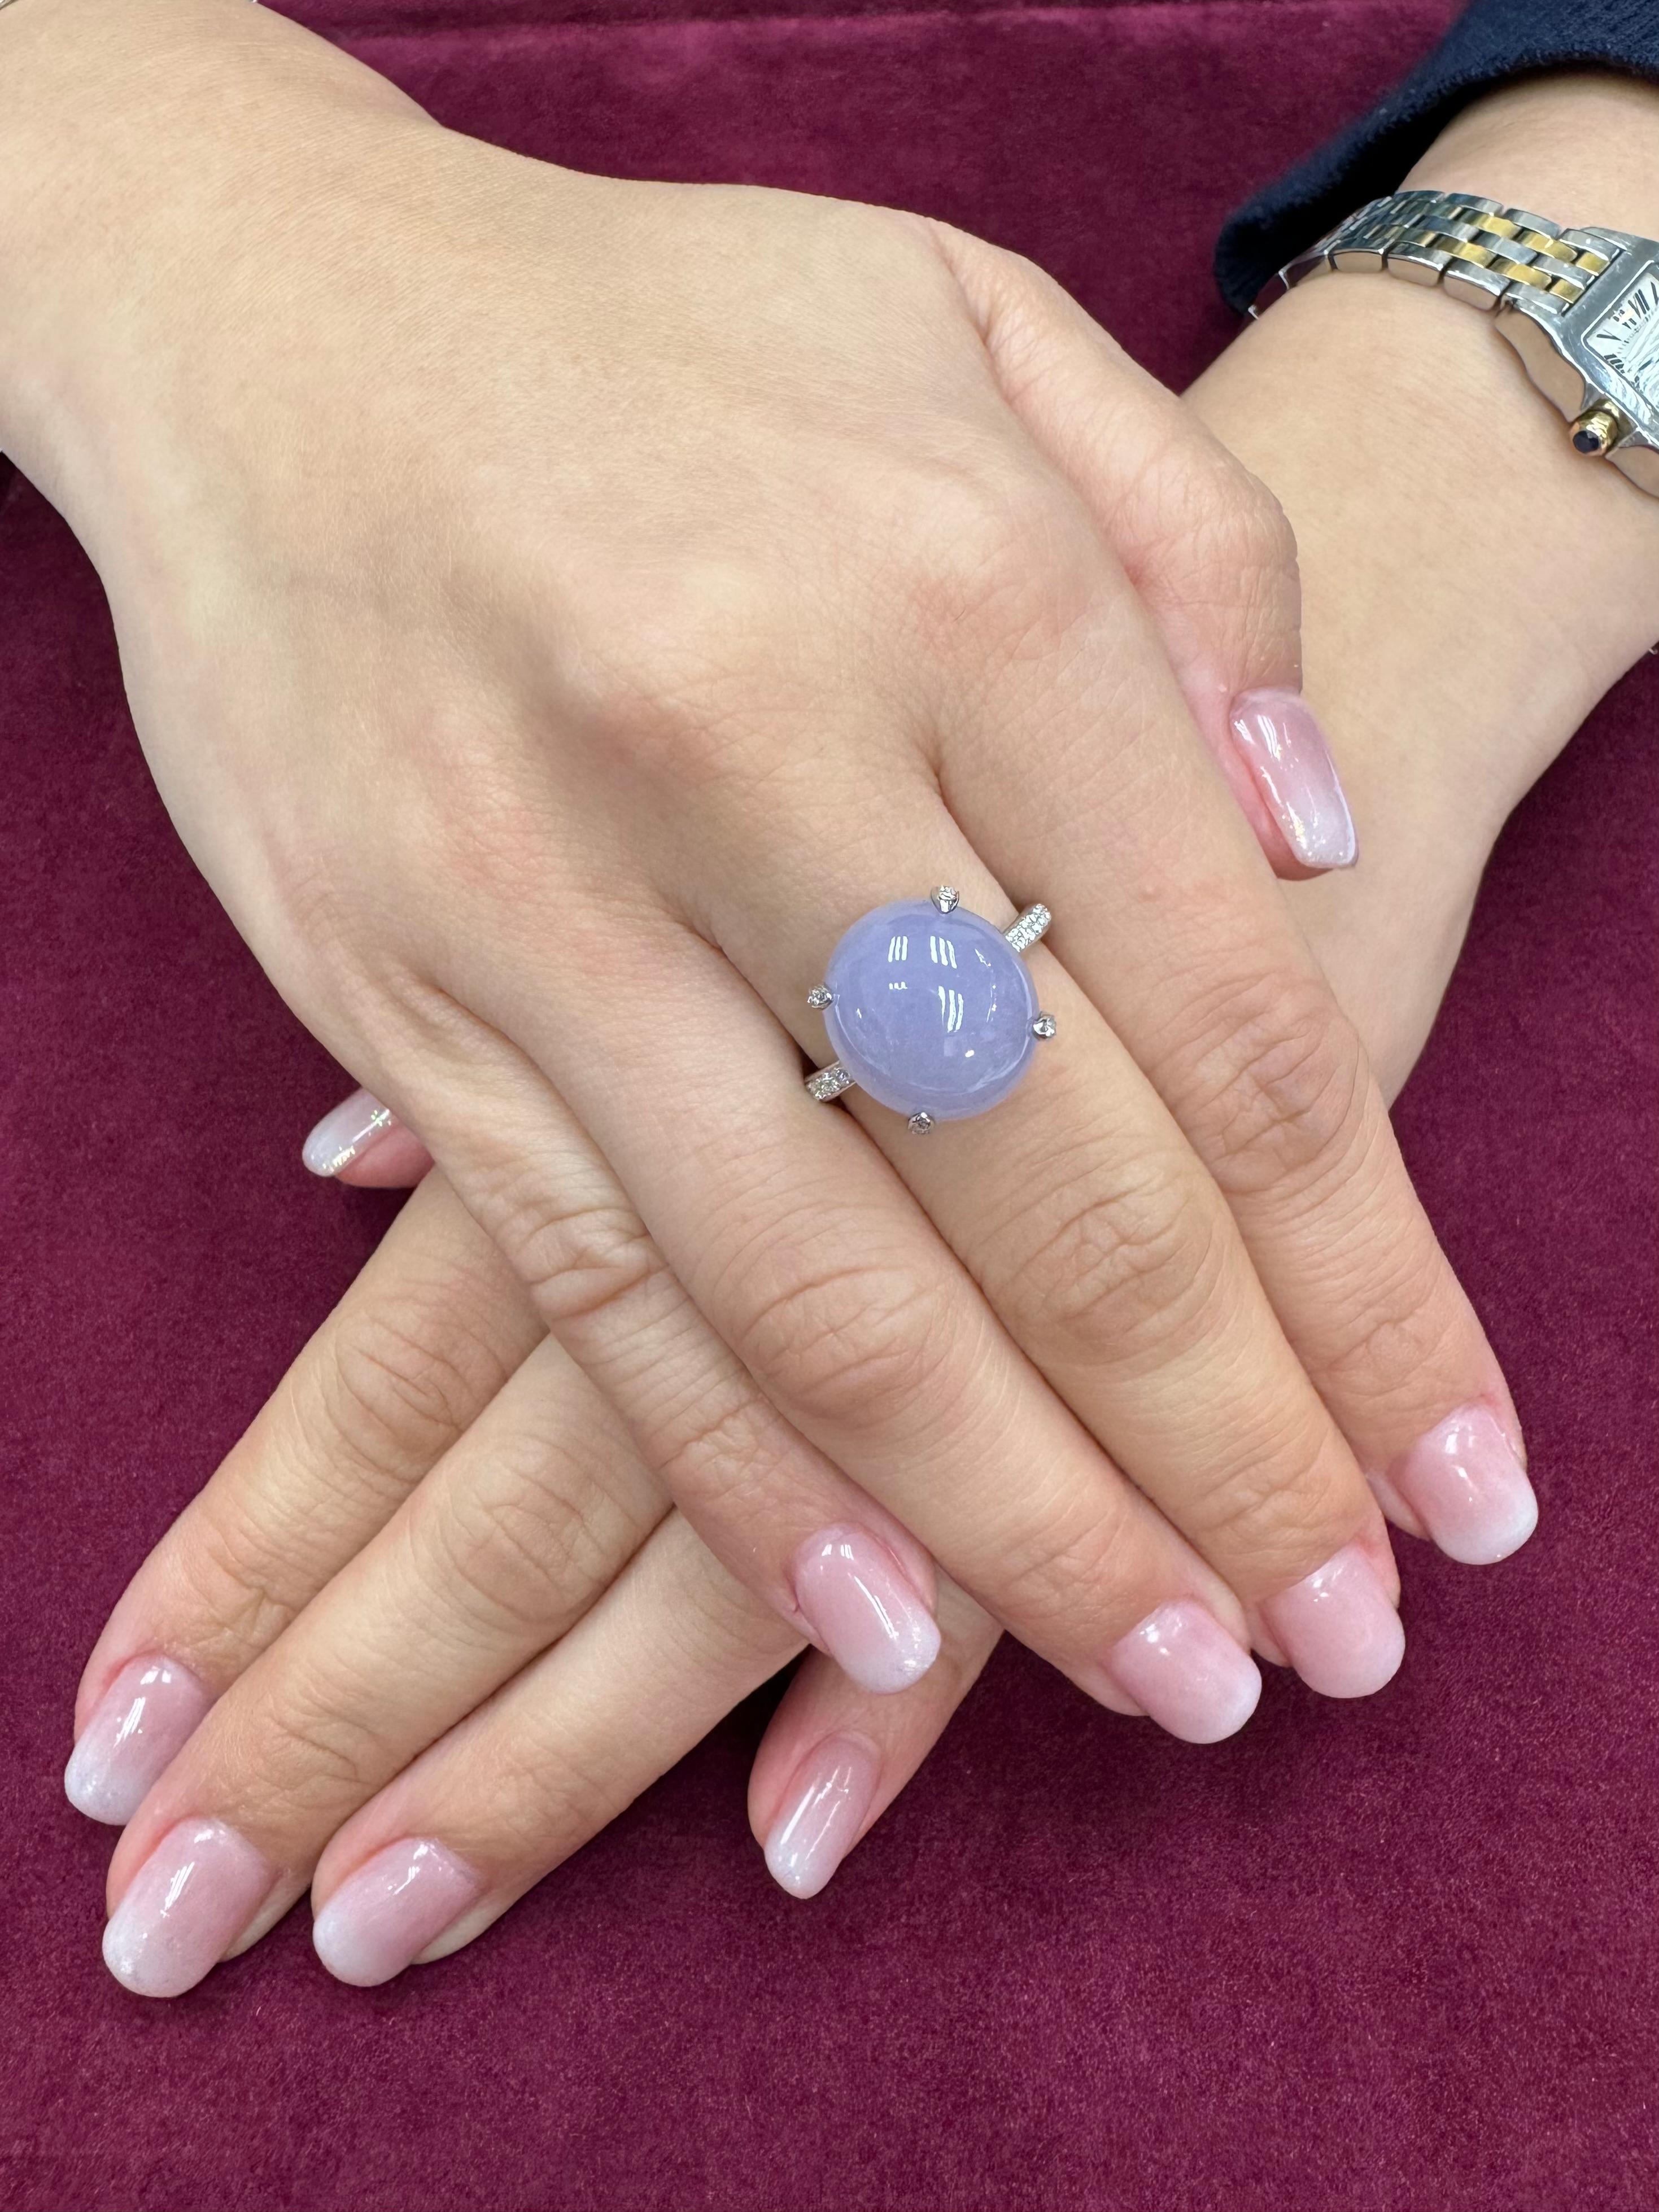 Please check out the HD Video! Here is a very eye pleasing lavender jade and diamond ring! It is certified natural jadeite jade. The ring is set in 18k white gold and diamonds. The center lavender jade cabochon is large at 11.36cts and measures